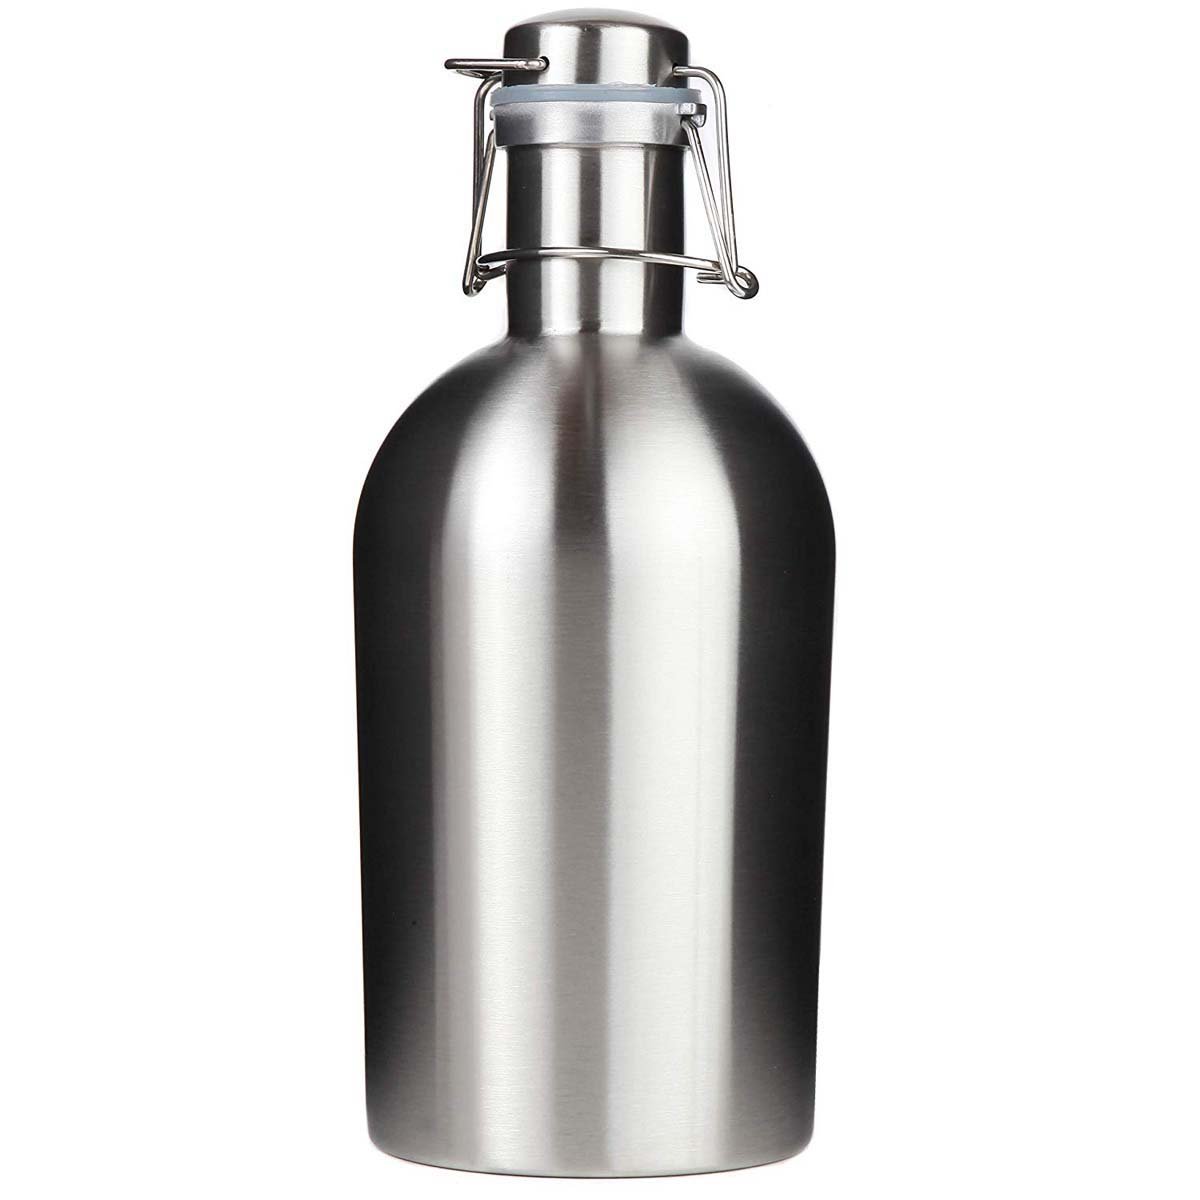 Men's Stainless Steel Beer Growler Mad Man by Mad Style Wholesale